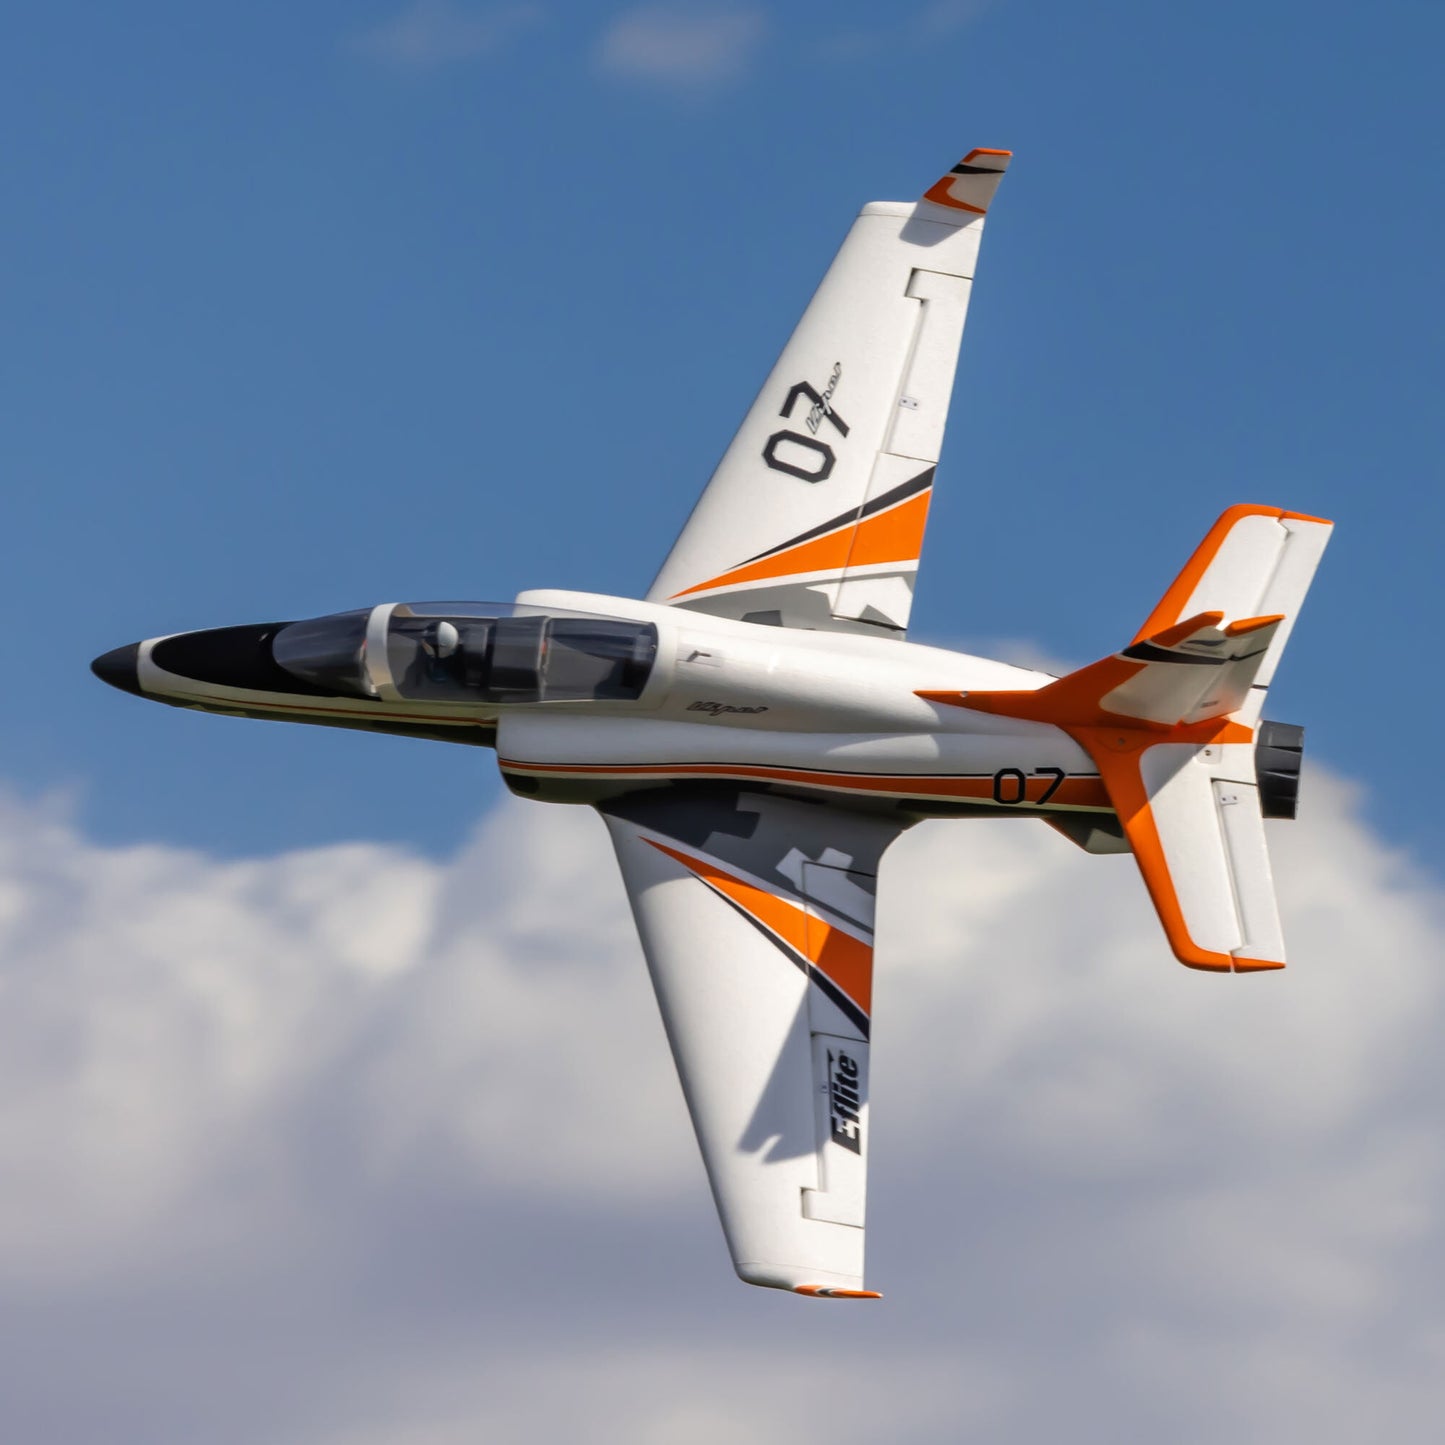 Viper 70 EDF Jet BNF Basic w/ AS3X and SAFE Select